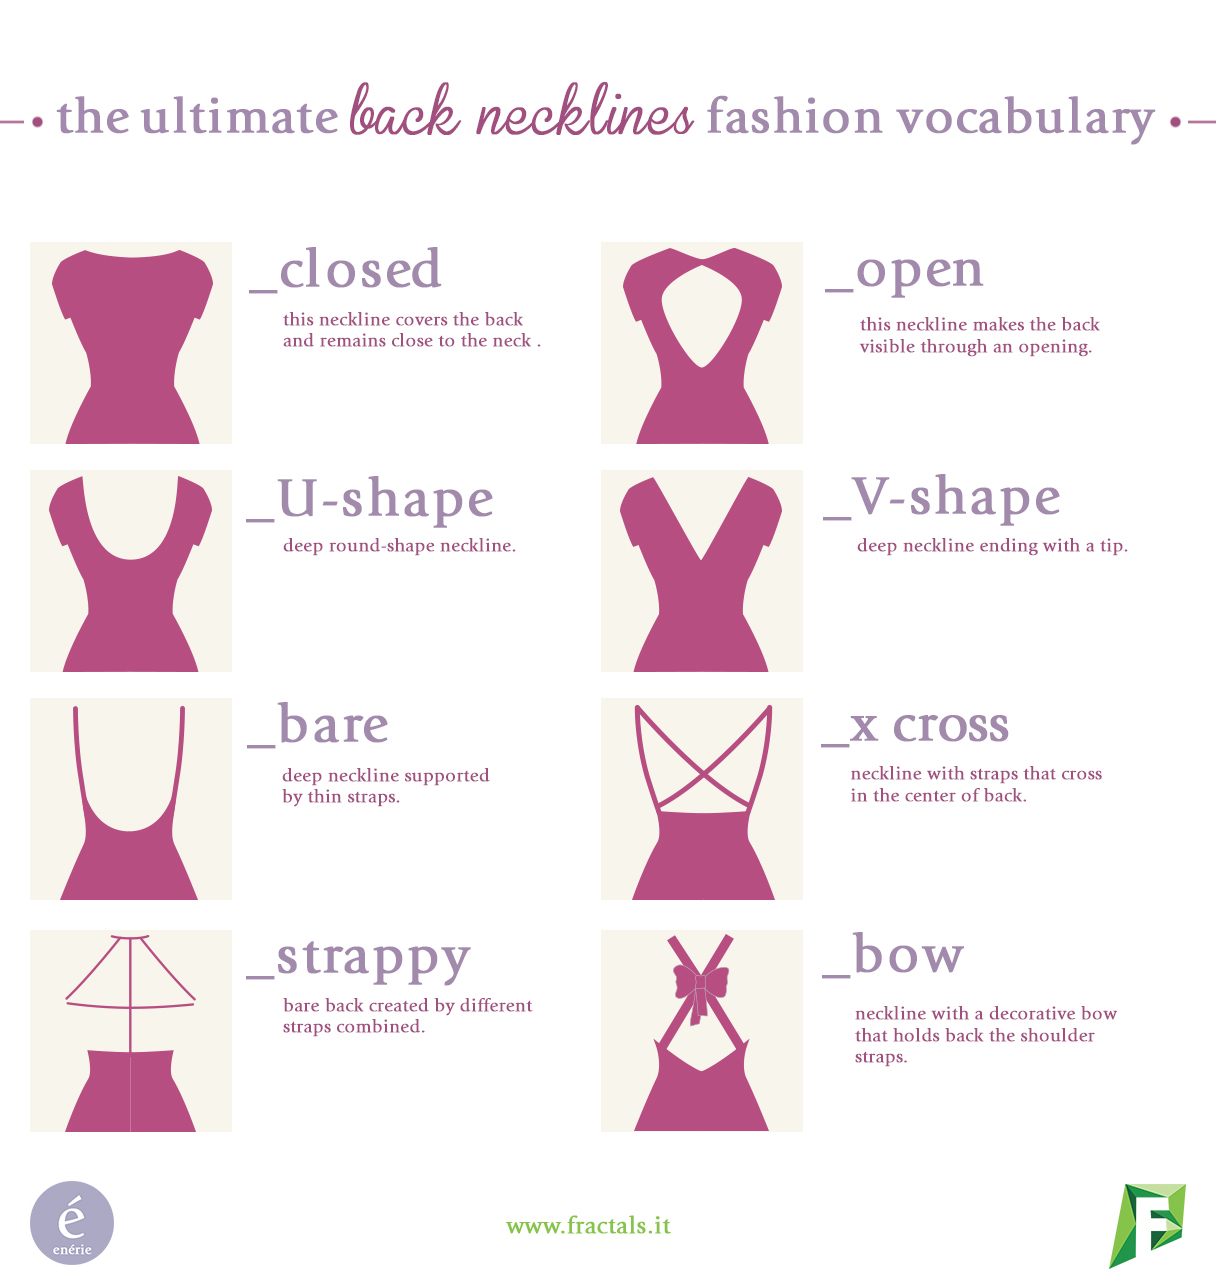 Fractals | The Ultimate Back Necklines Fashion Vocabulary